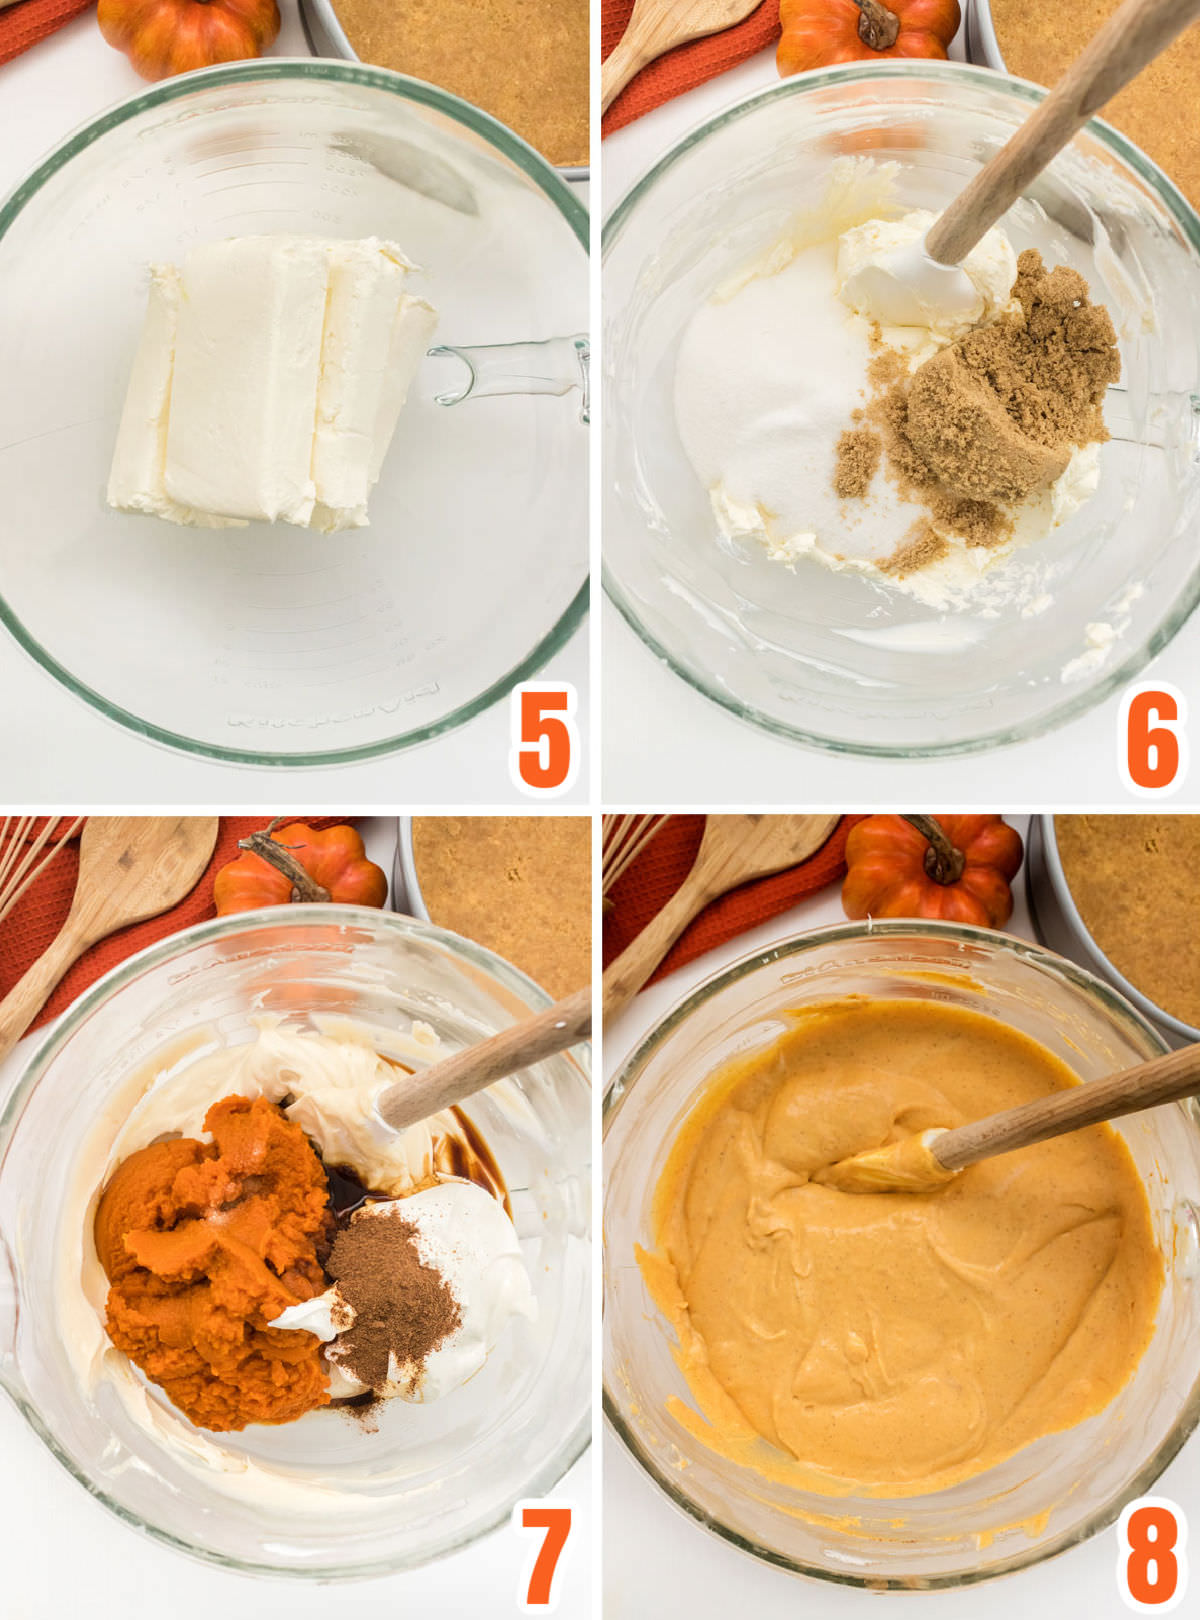 Collage image showing how to make the Pumpkin Cheesecake mixture.